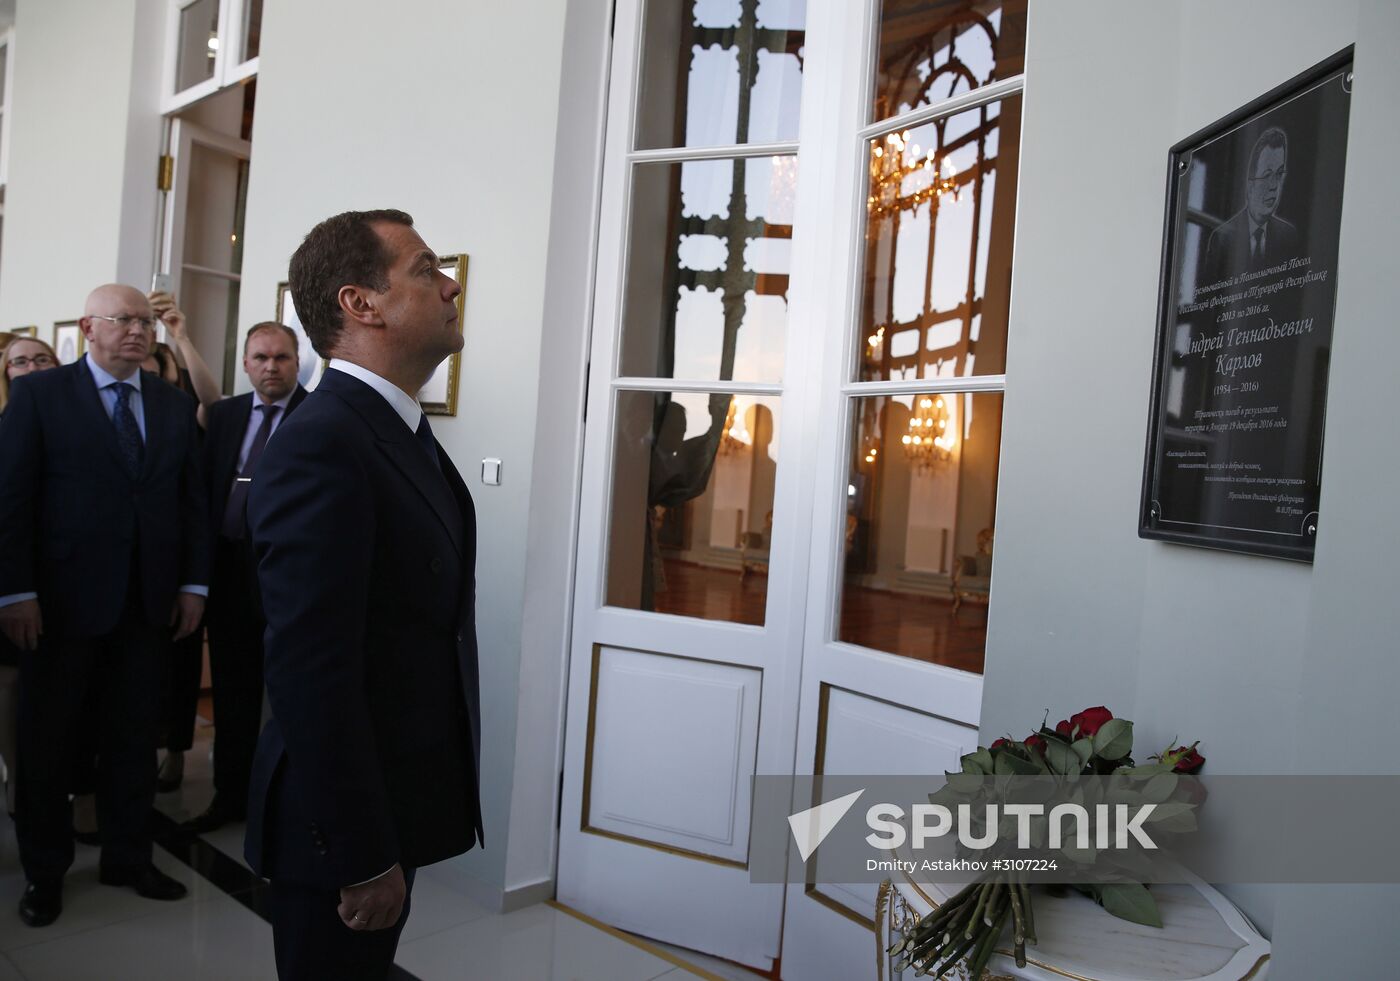 Russian Prime Minister Dmitry Medvedev attends BSEC summit in Istanbul